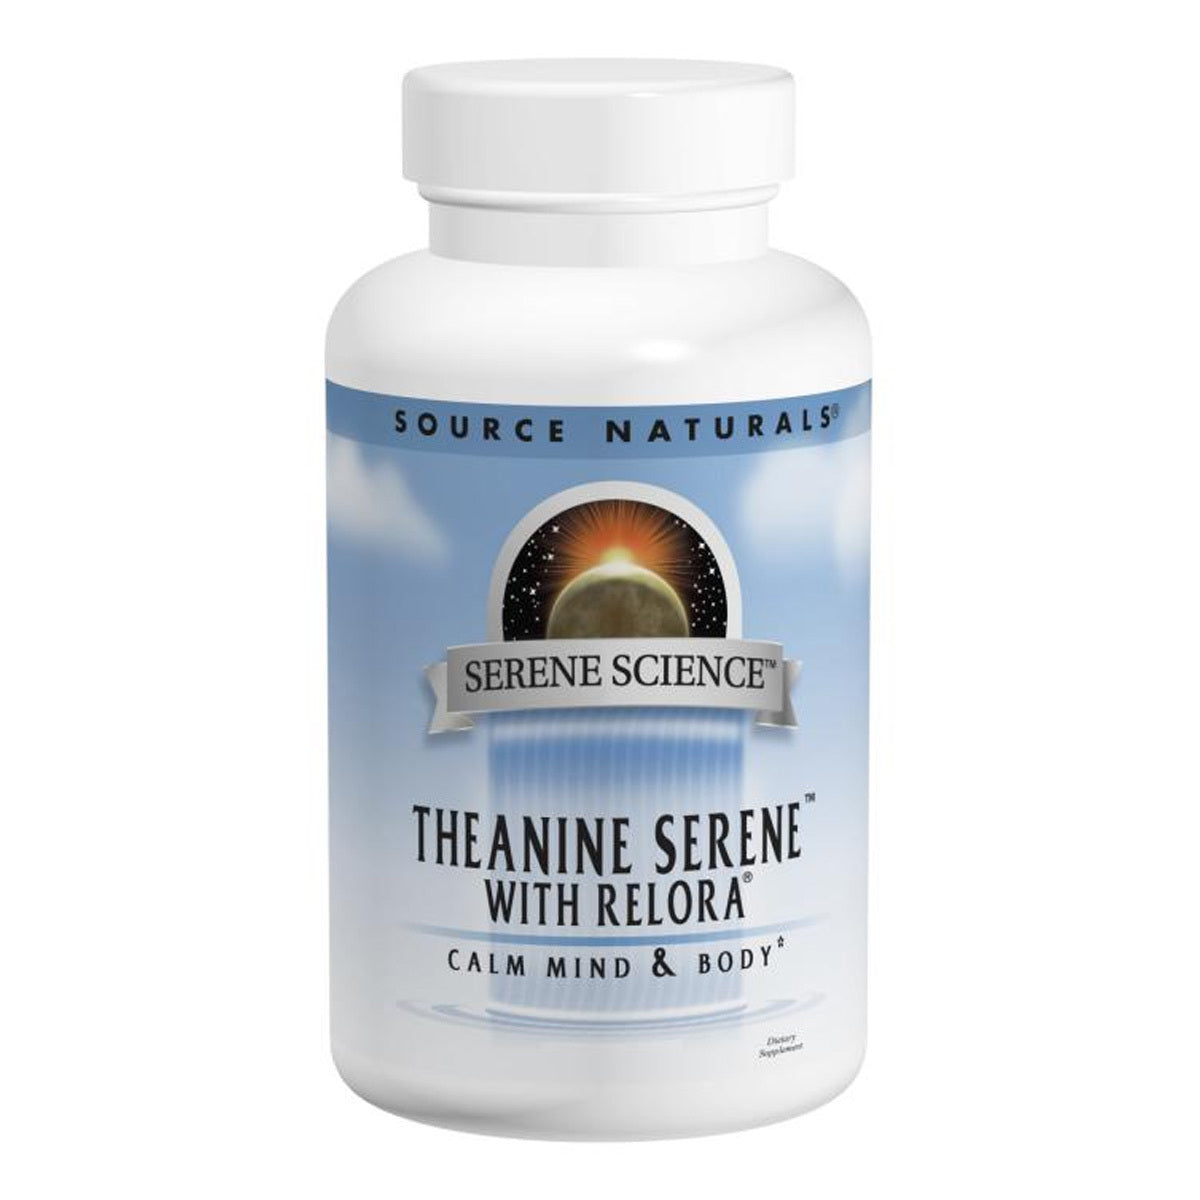 Primary image of Serene Science Theanine Serene with Relora